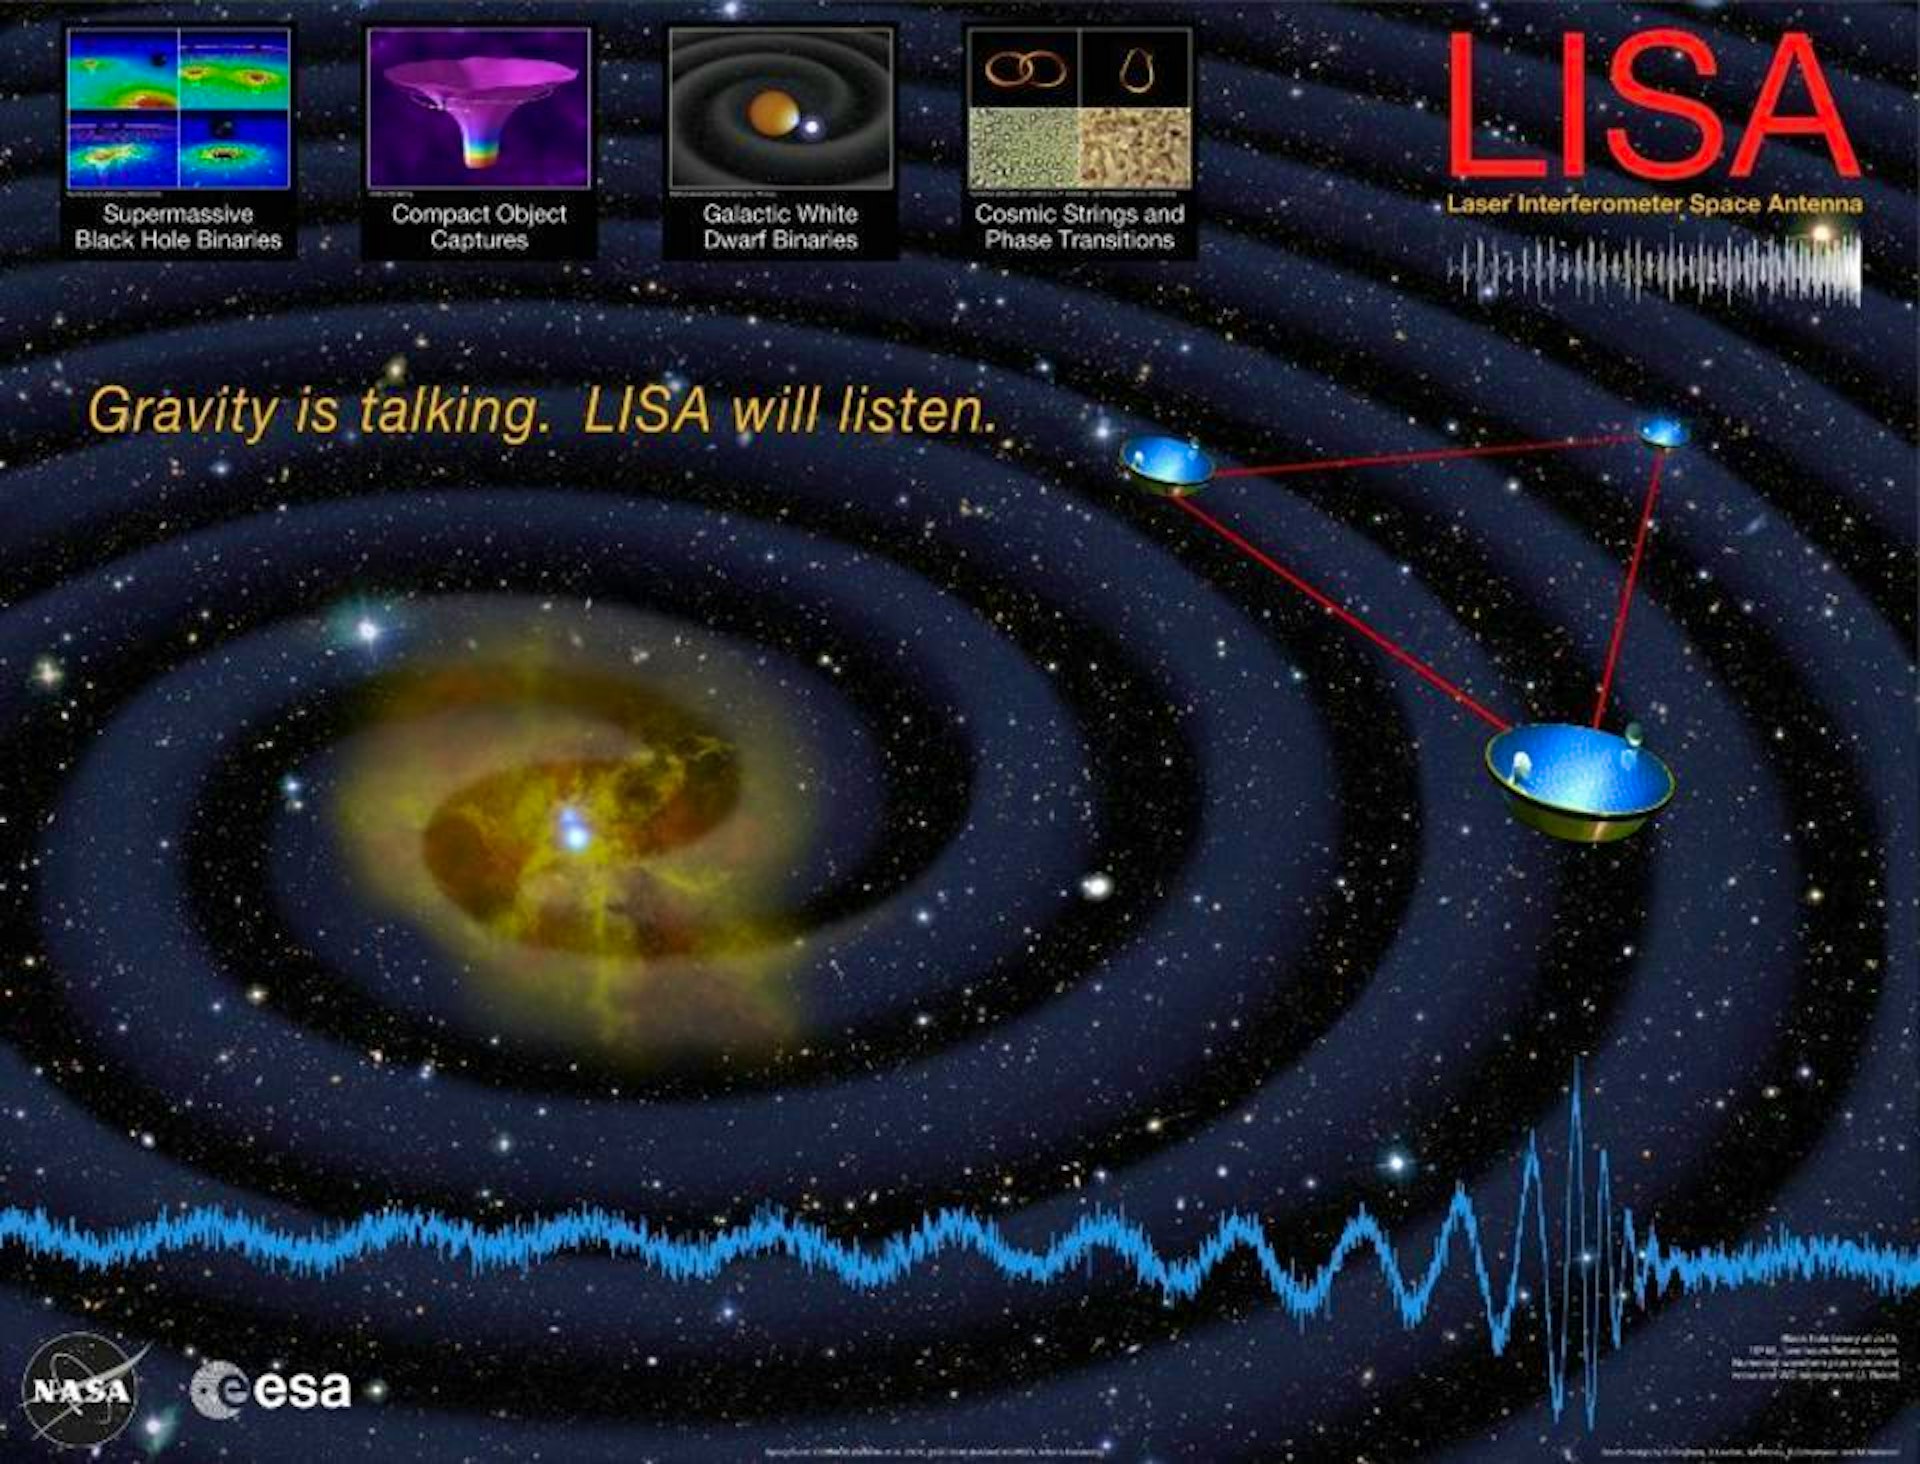 LIGO's direction plan for gravitational waves, which may clue us in to the whereabouts of aliens.